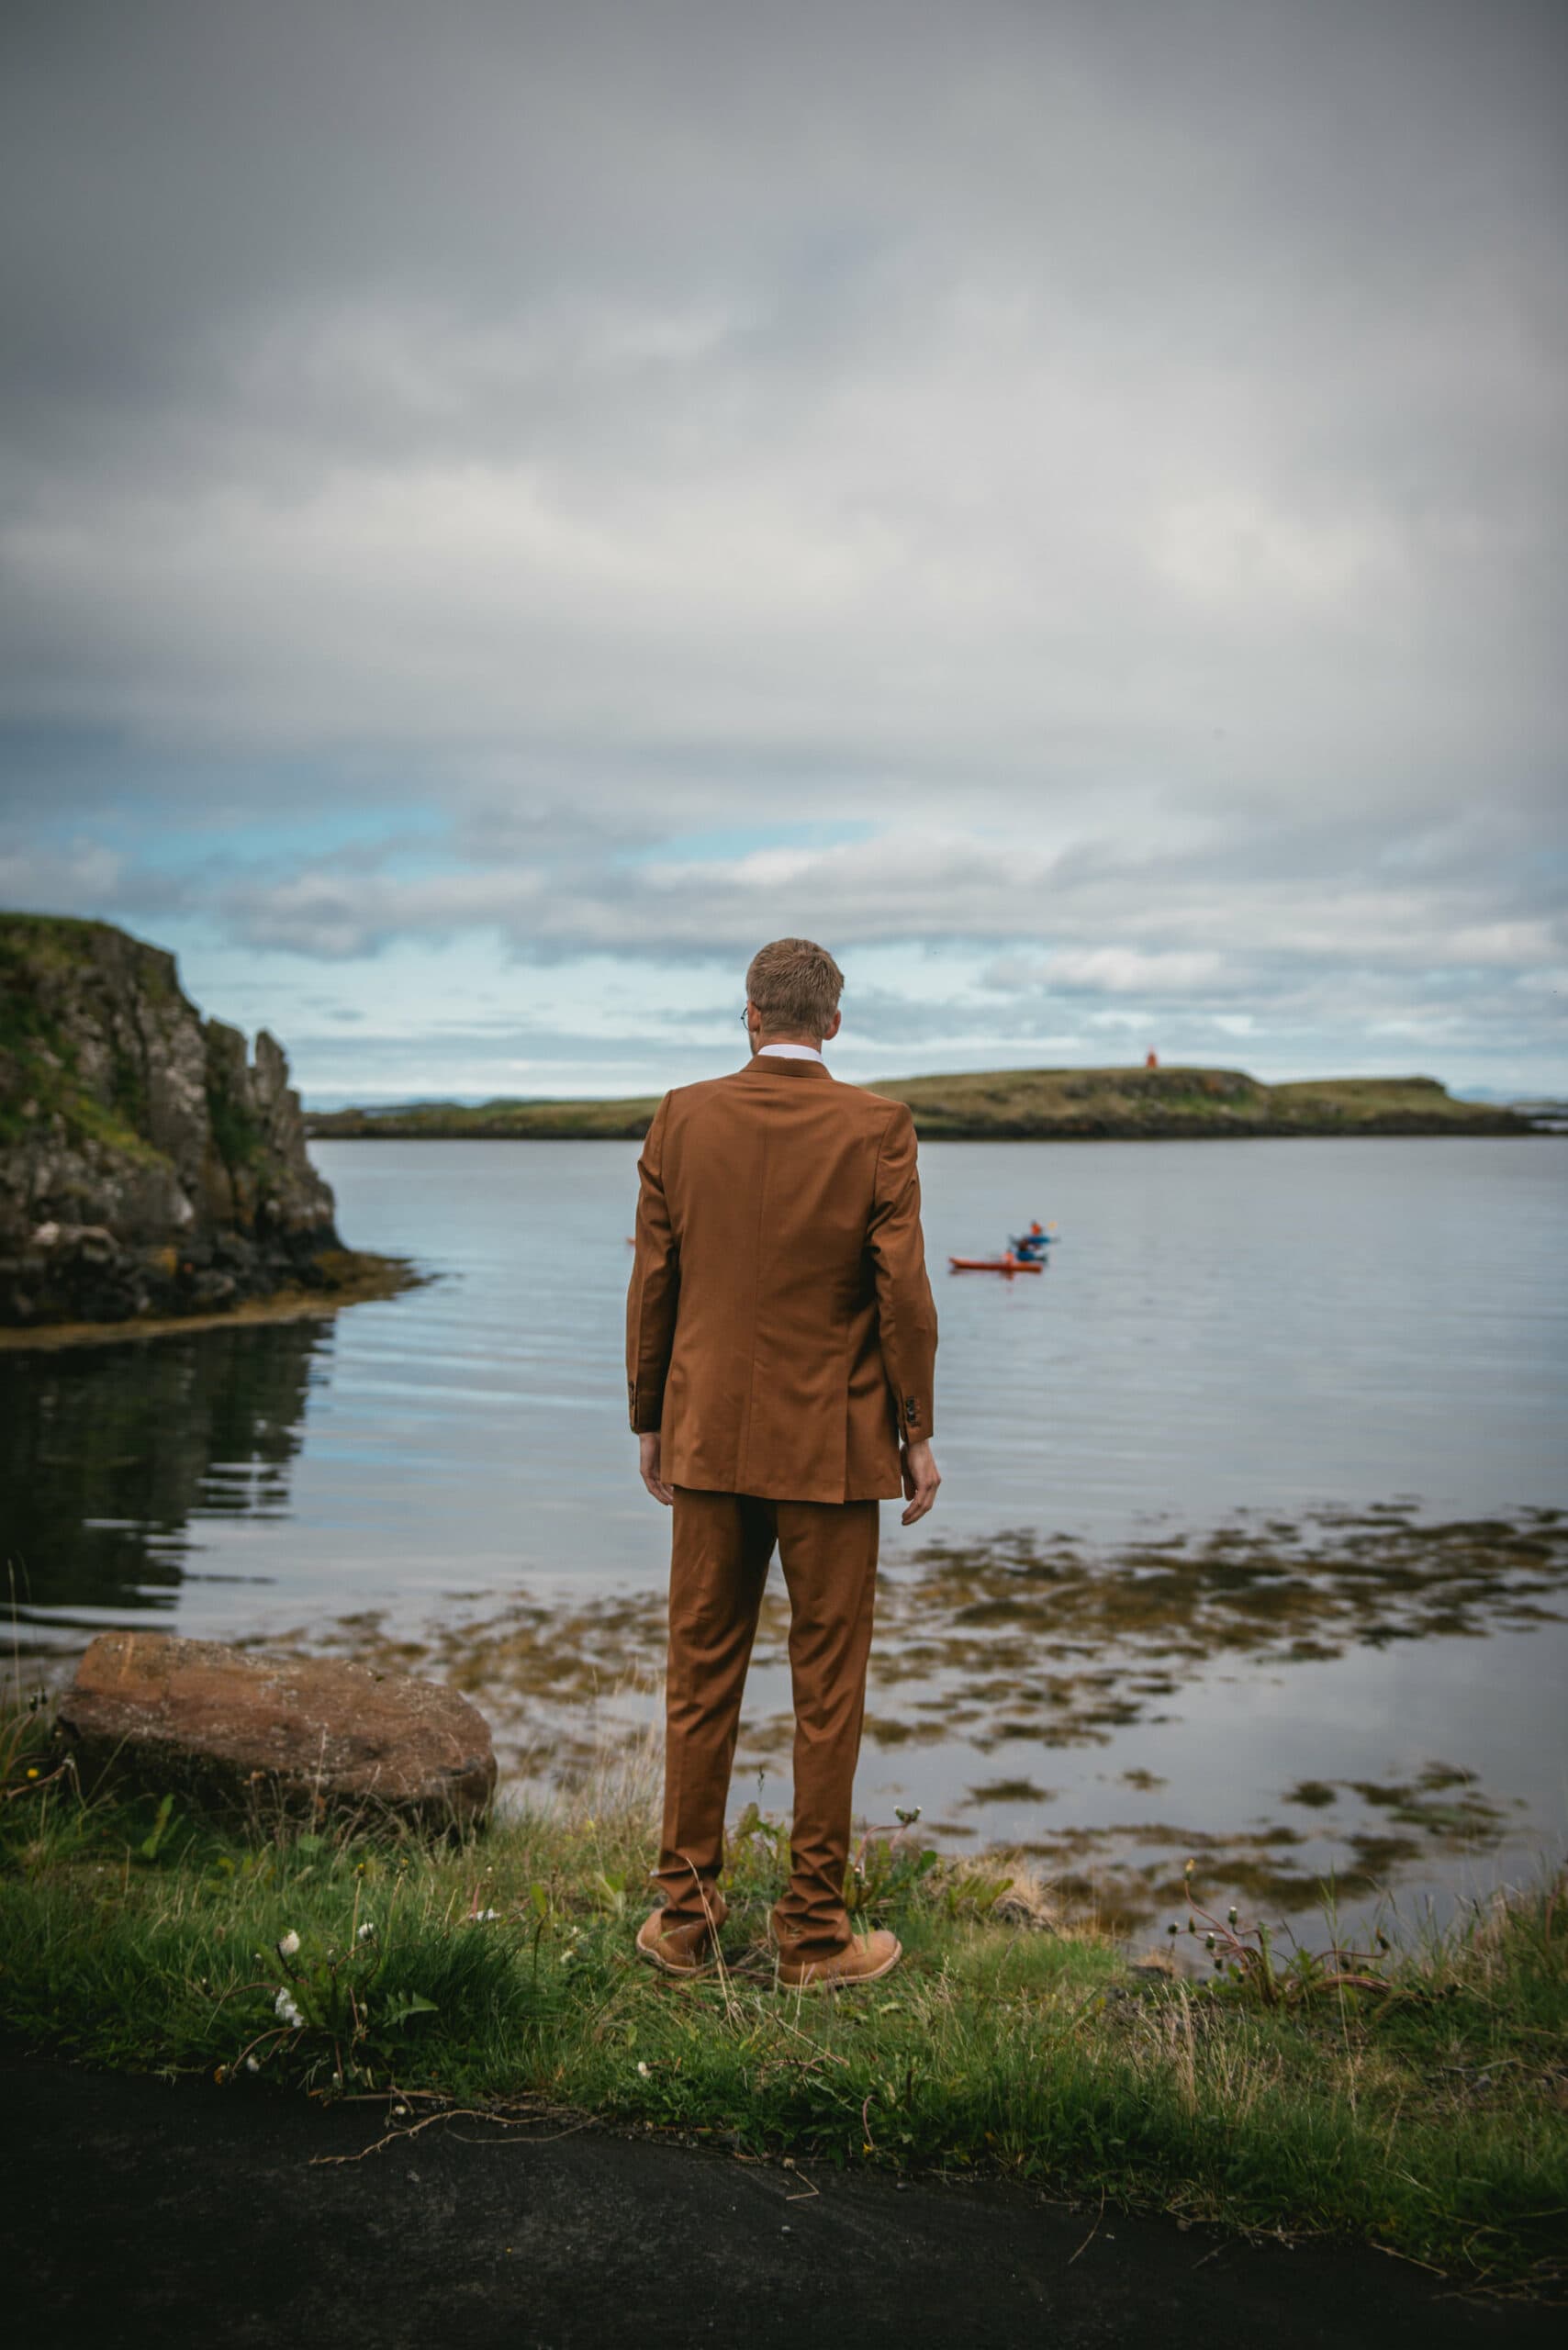 The groom's heart races with eager anticipation as he awaits the first look, surrounded by the enchanting allure of their Iceland Westfjords elopement.